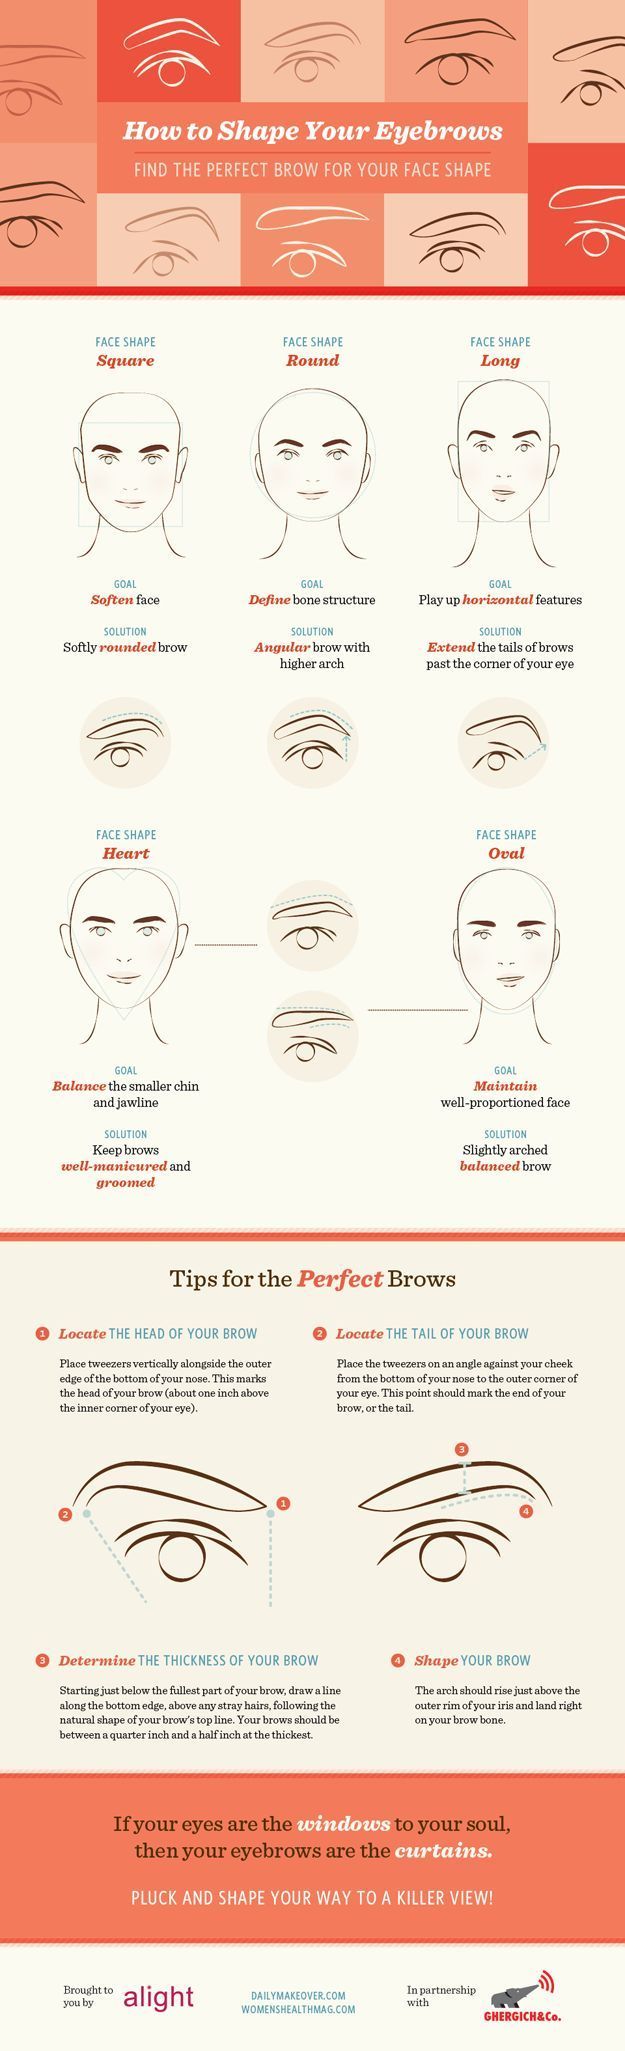 Eyebrow Tutorial: Finding The Right Brow Shape For Your Face | Beauty Tips And T...